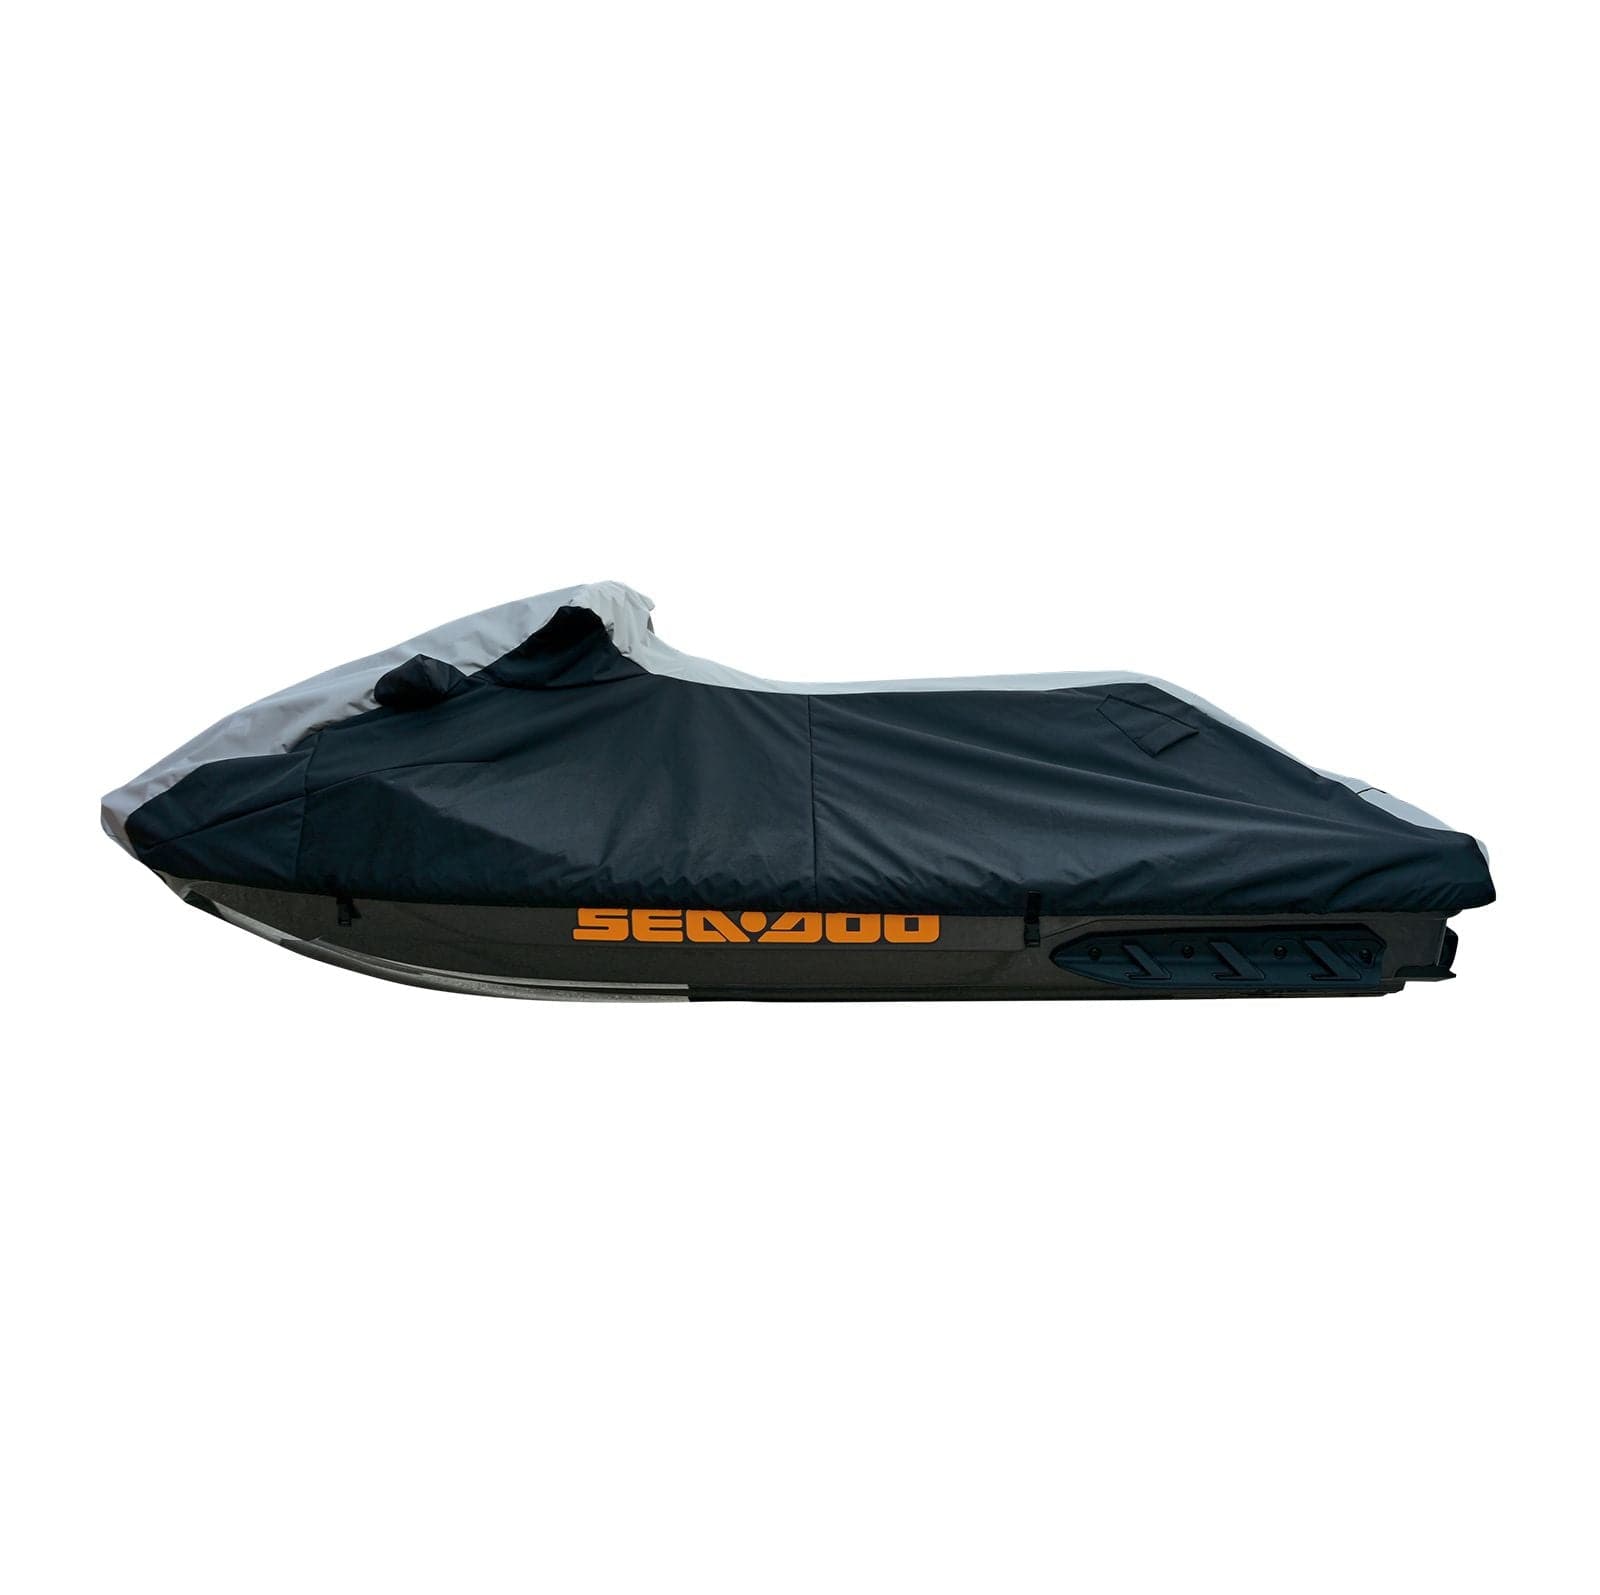 Trailerable Storage cover with vents for Yamaha 1991-1993 Wave Runner LX/ 1992-1995 VXR, VXR Pro